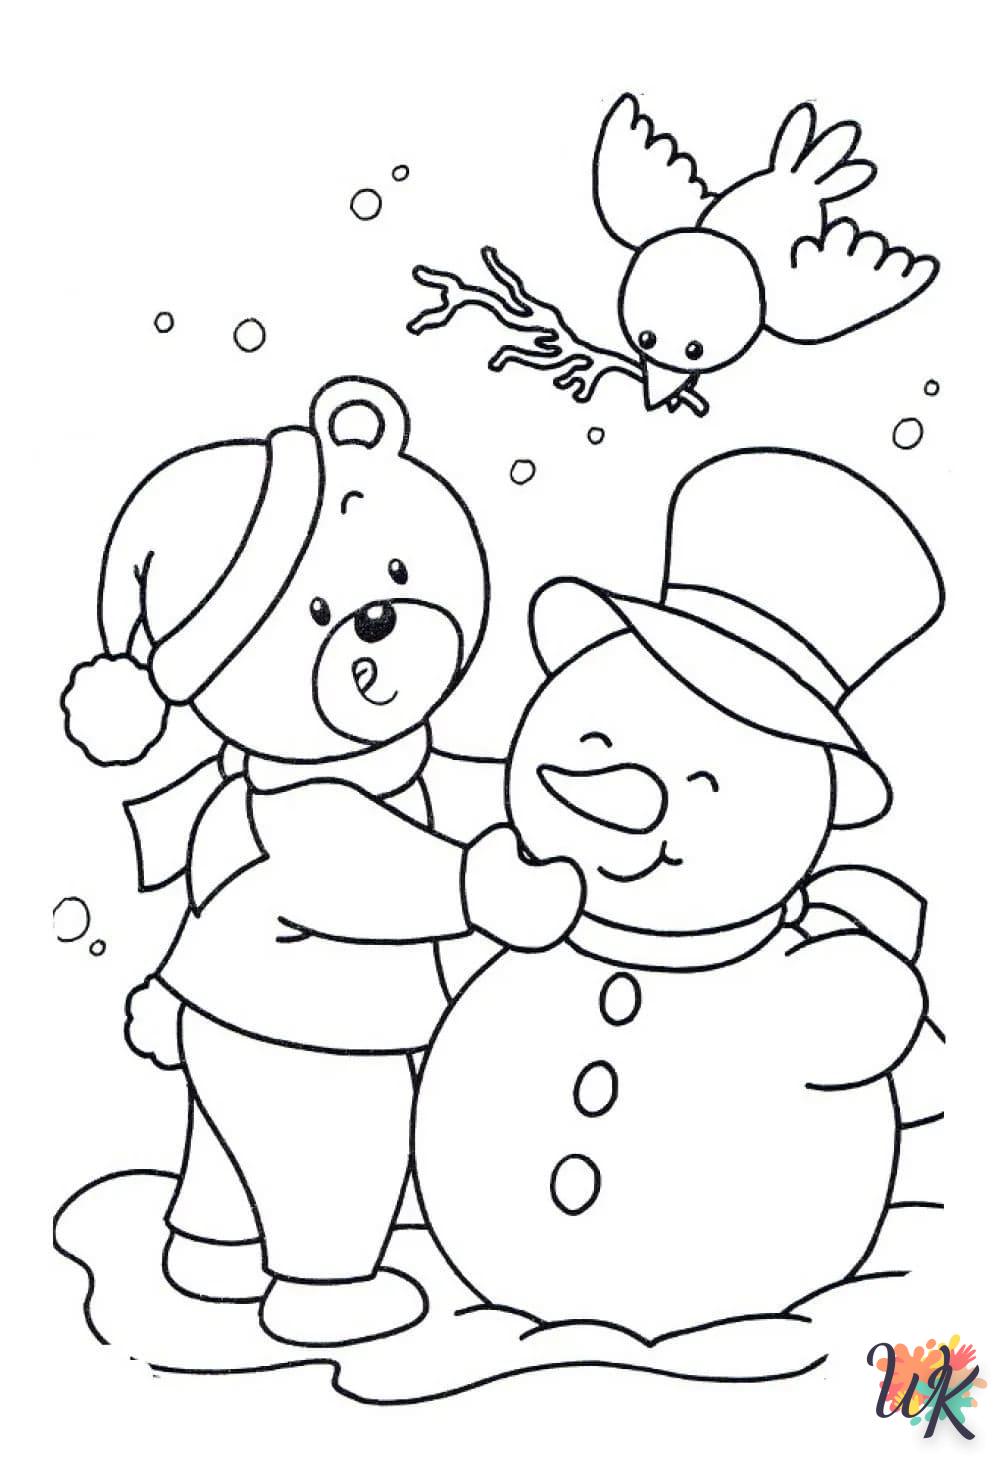 Snowman coloring page to print for 7 year olds 1